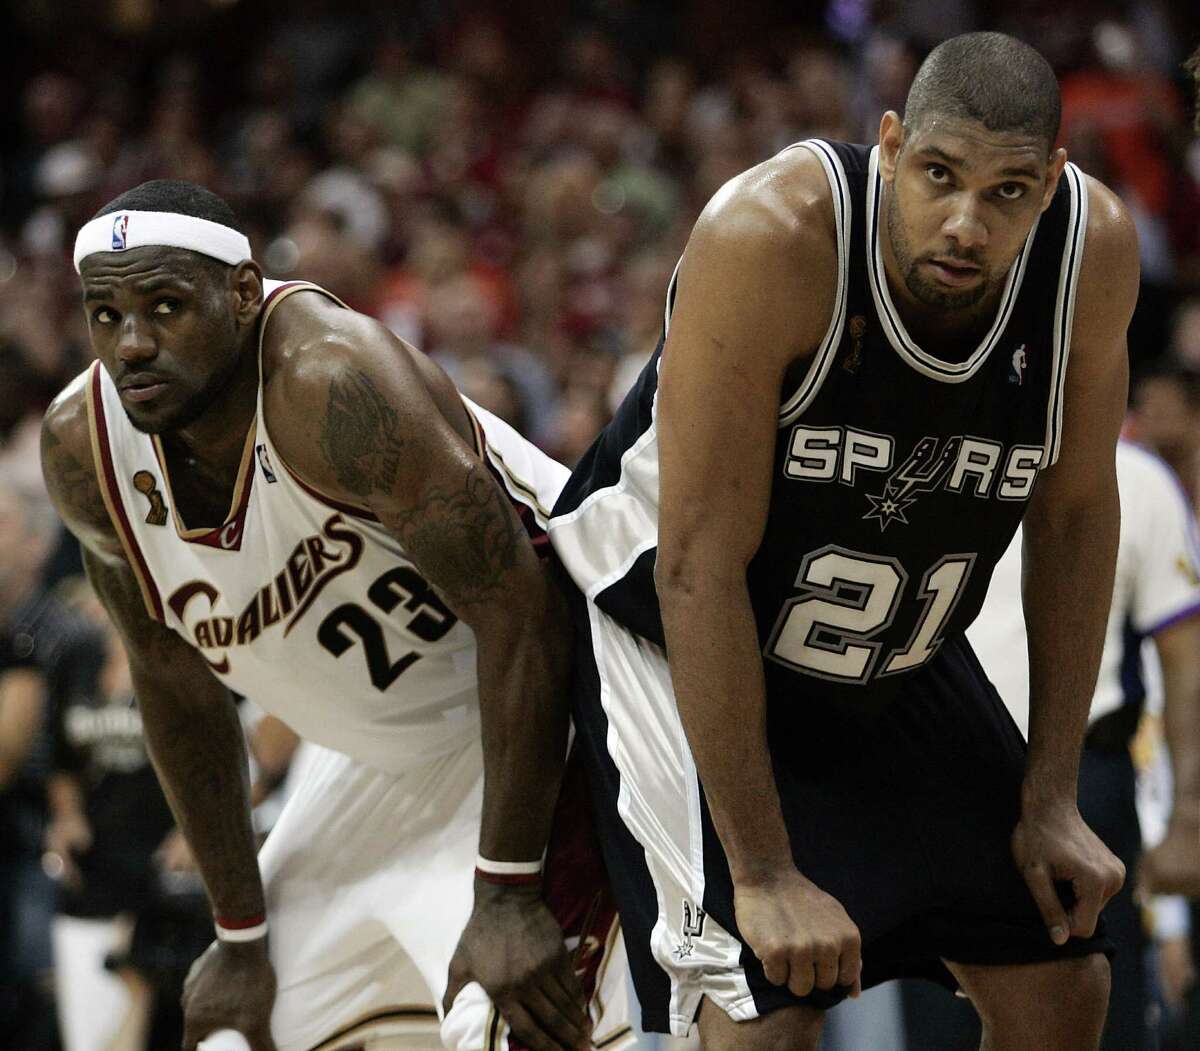 Tim Duncan of the San Antonio Spurs and LeBron James of the Cleveland Cavaliers prepare for a play during Game 4 of the NBA Finals on June 14, 2007, at Quicken Loans Arena in Cleveland, Ohio. The Spurs won 83-82 to sweep the best-of-seven series 4-0.